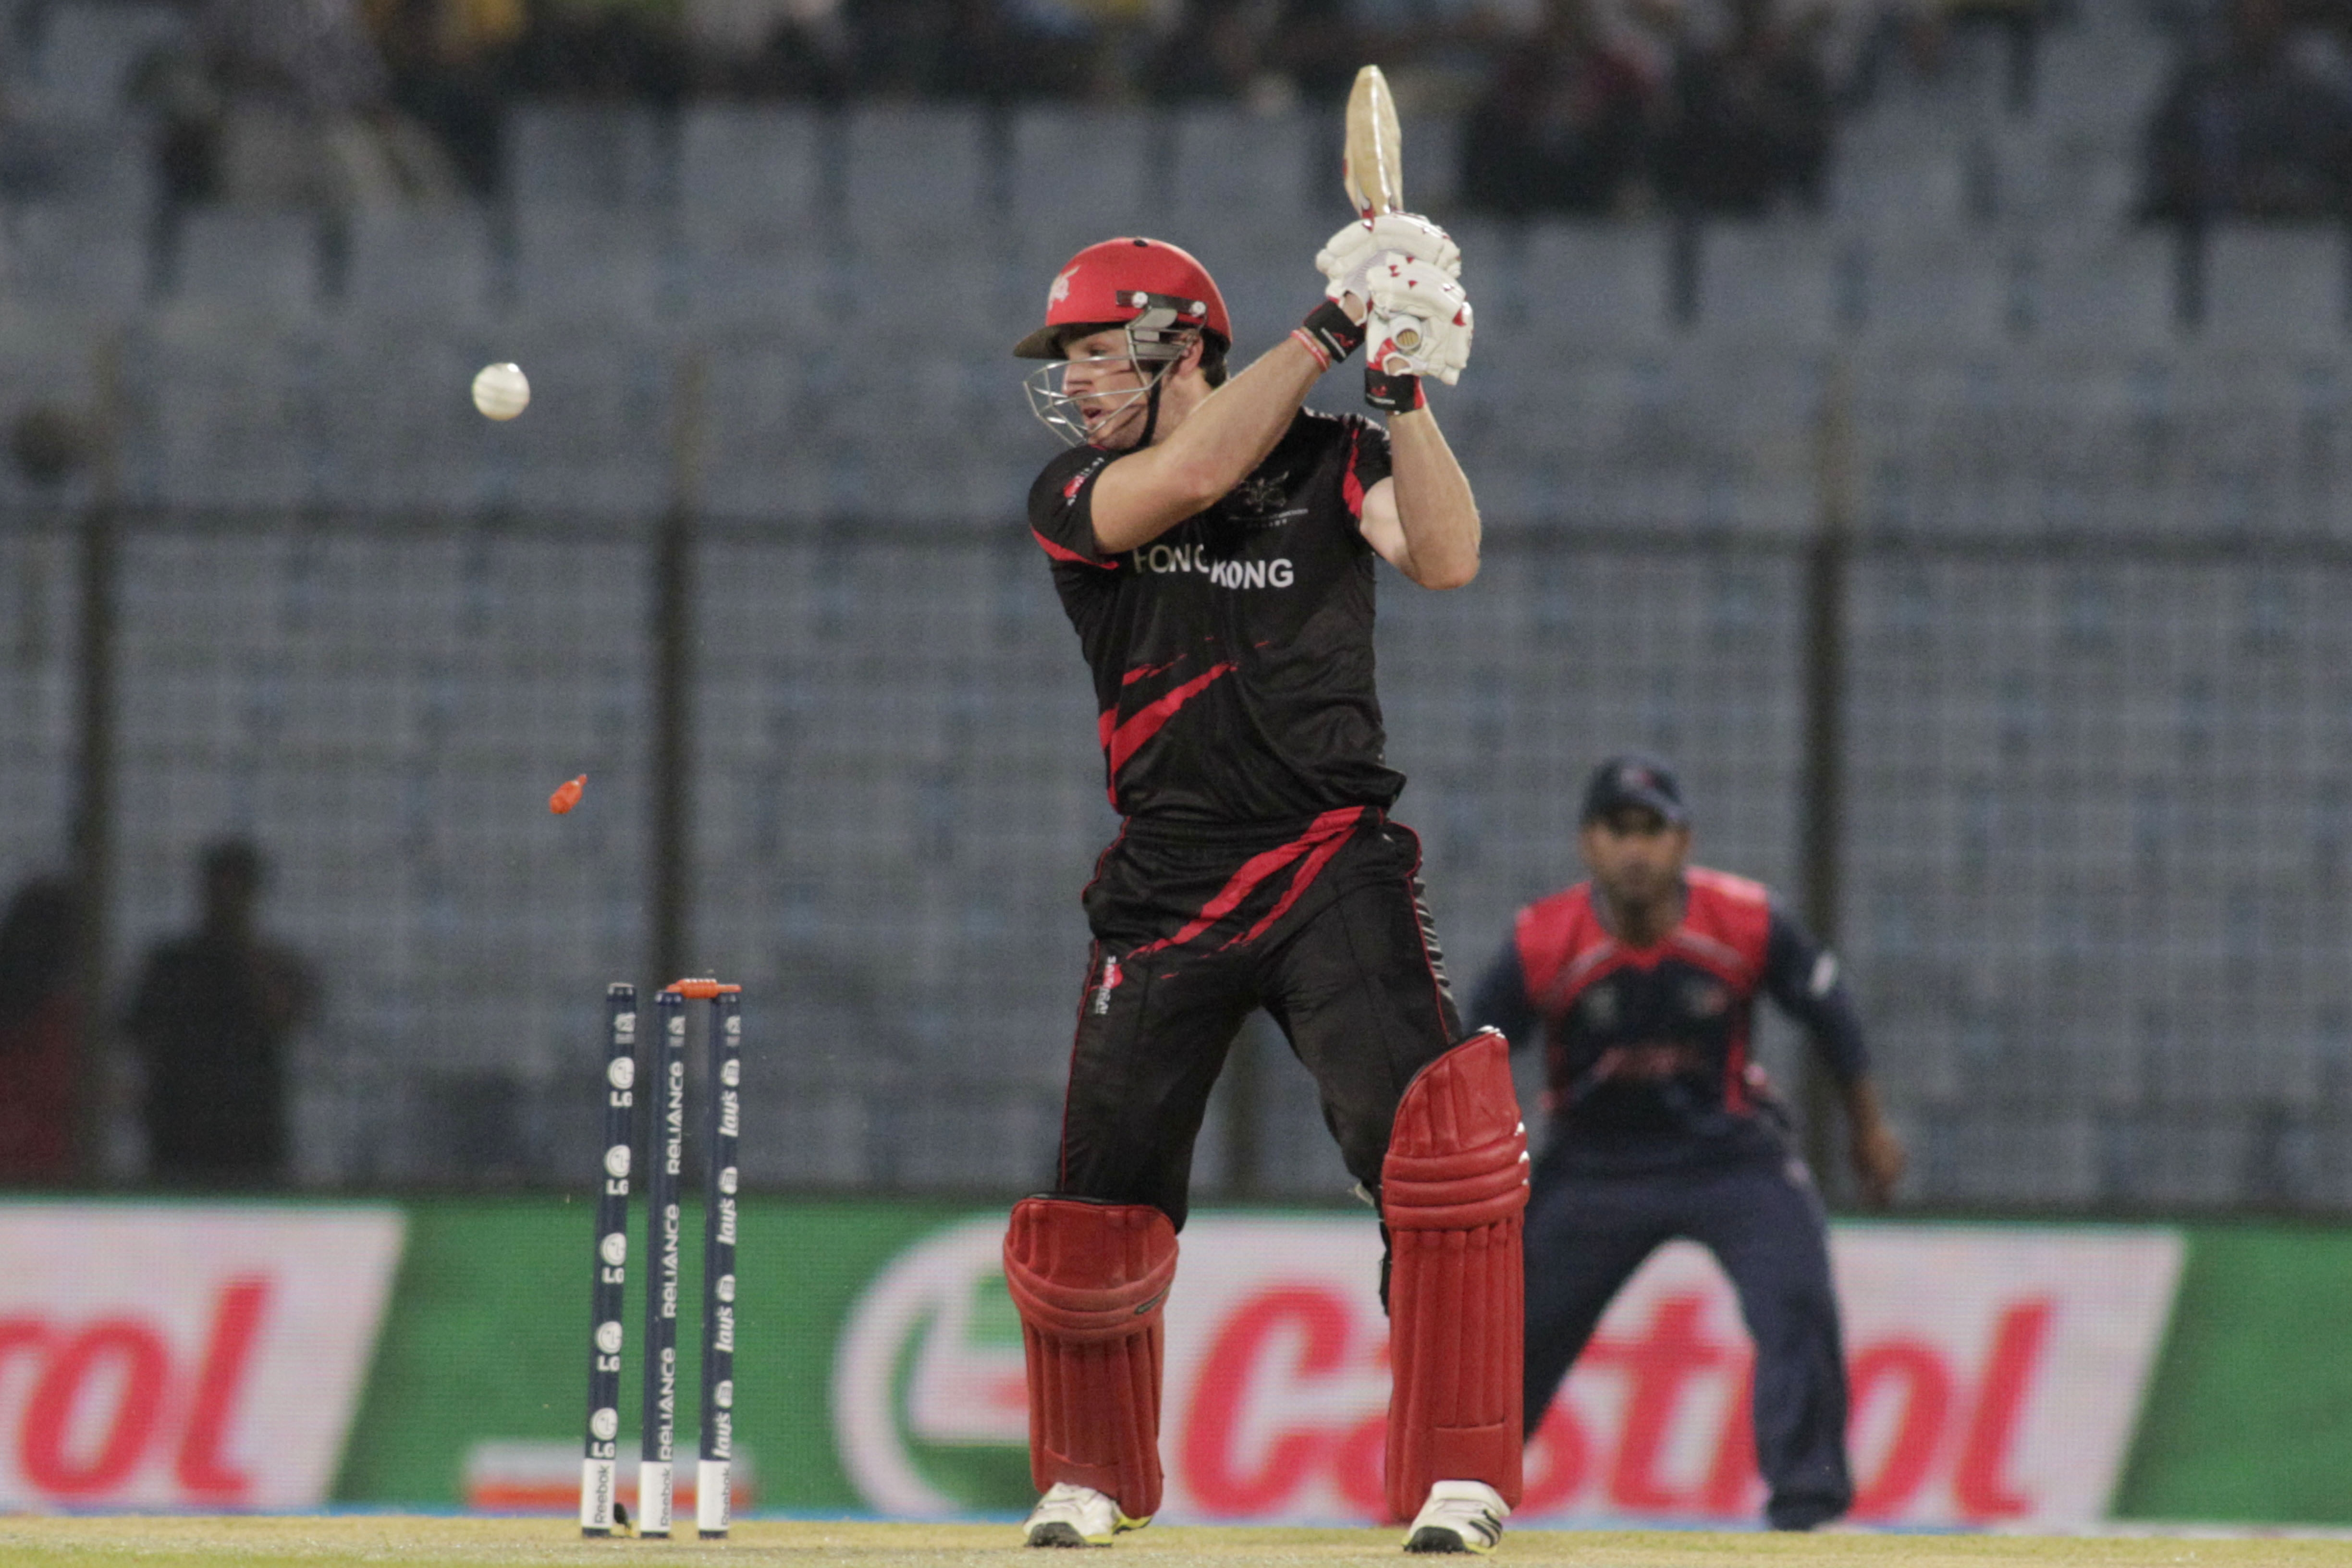 Hong Kong captain Jamie Atkinson is bowled during their ICC Twenty20 World Cup match against Nepal in Chittagong. Photo: AP